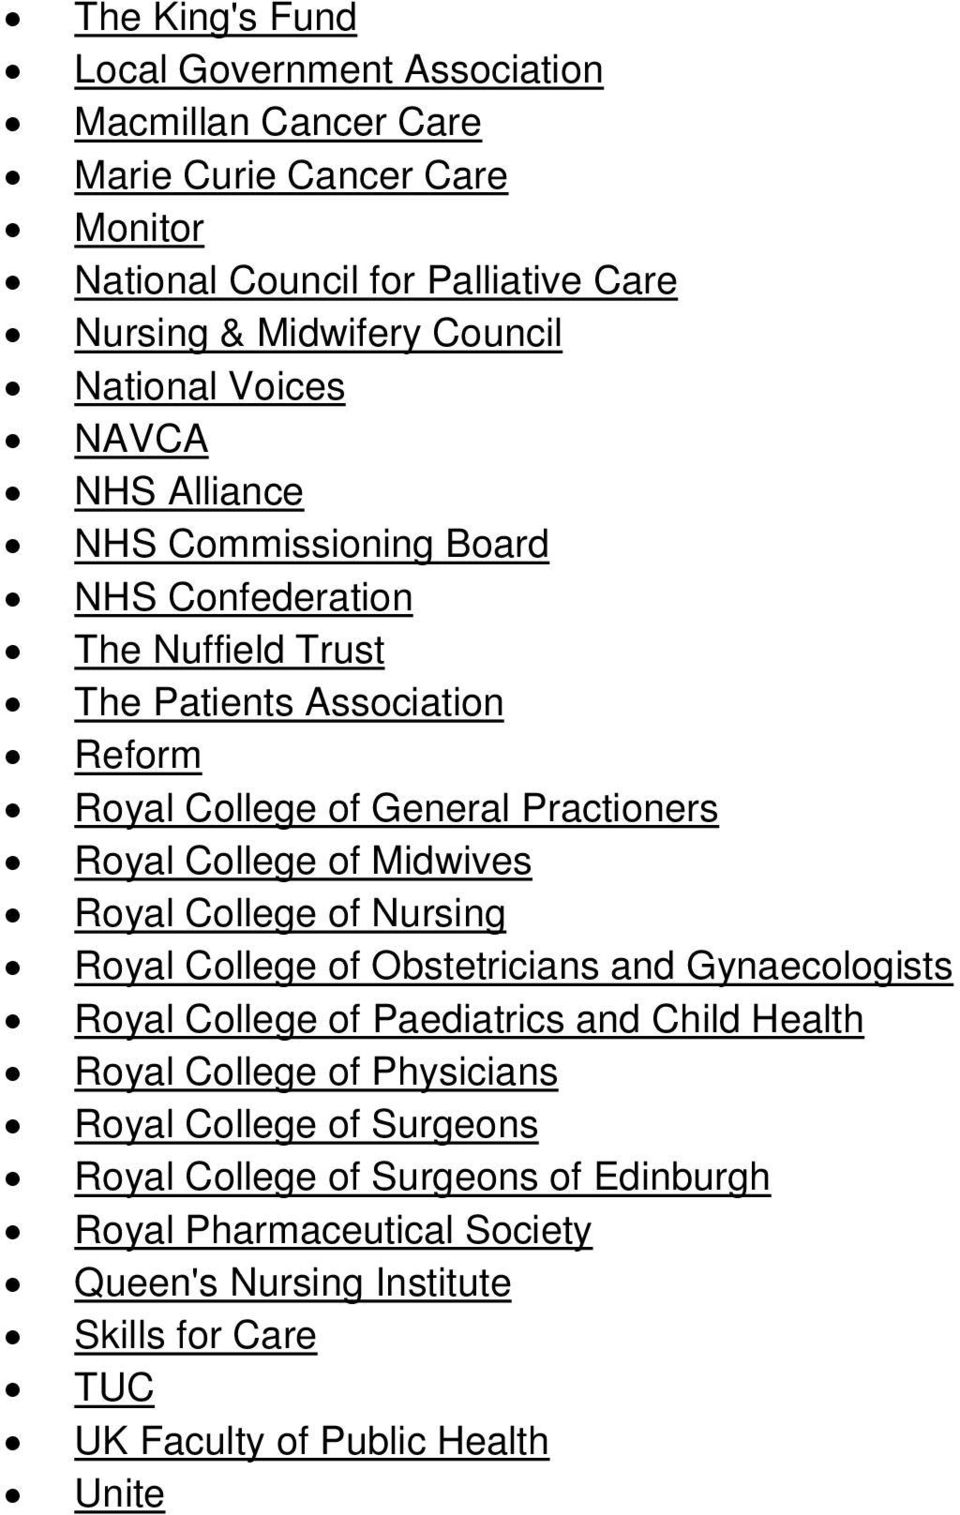 Royal College of Midwives Royal College of Nursing Royal College of Obstetricians and Gynaecologists Royal College of Paediatrics and Child Health Royal College of